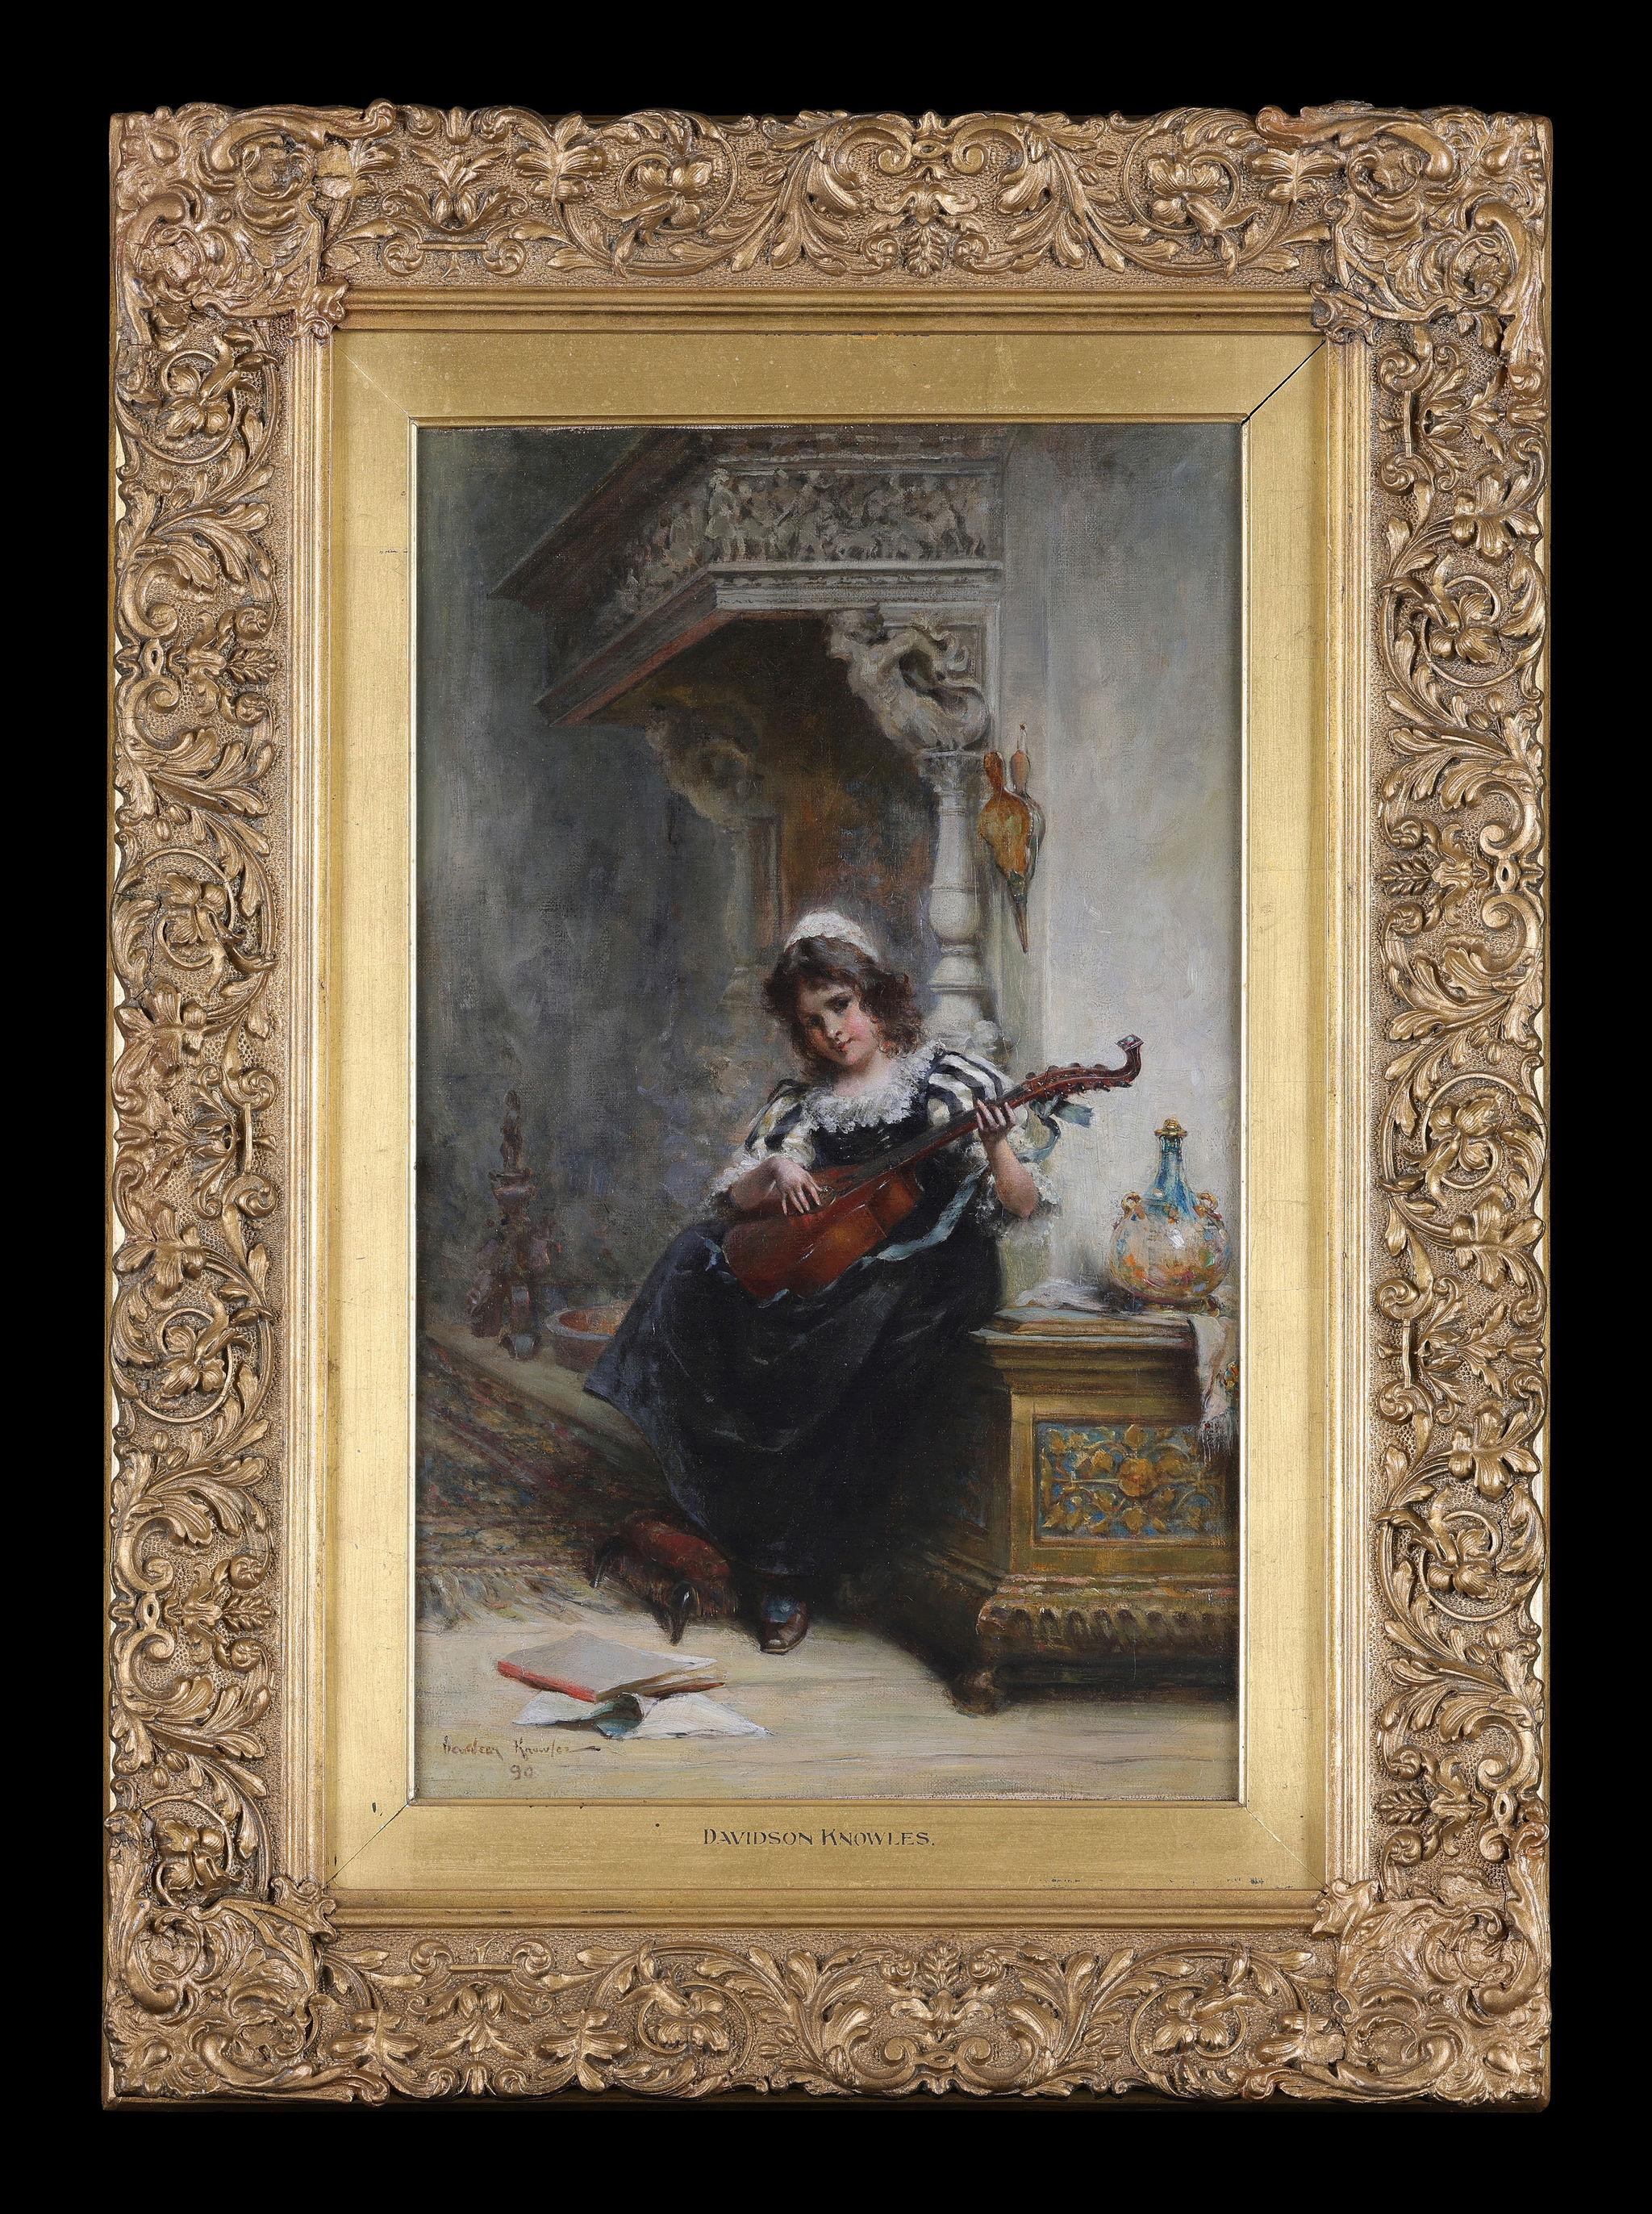 The Young Musician